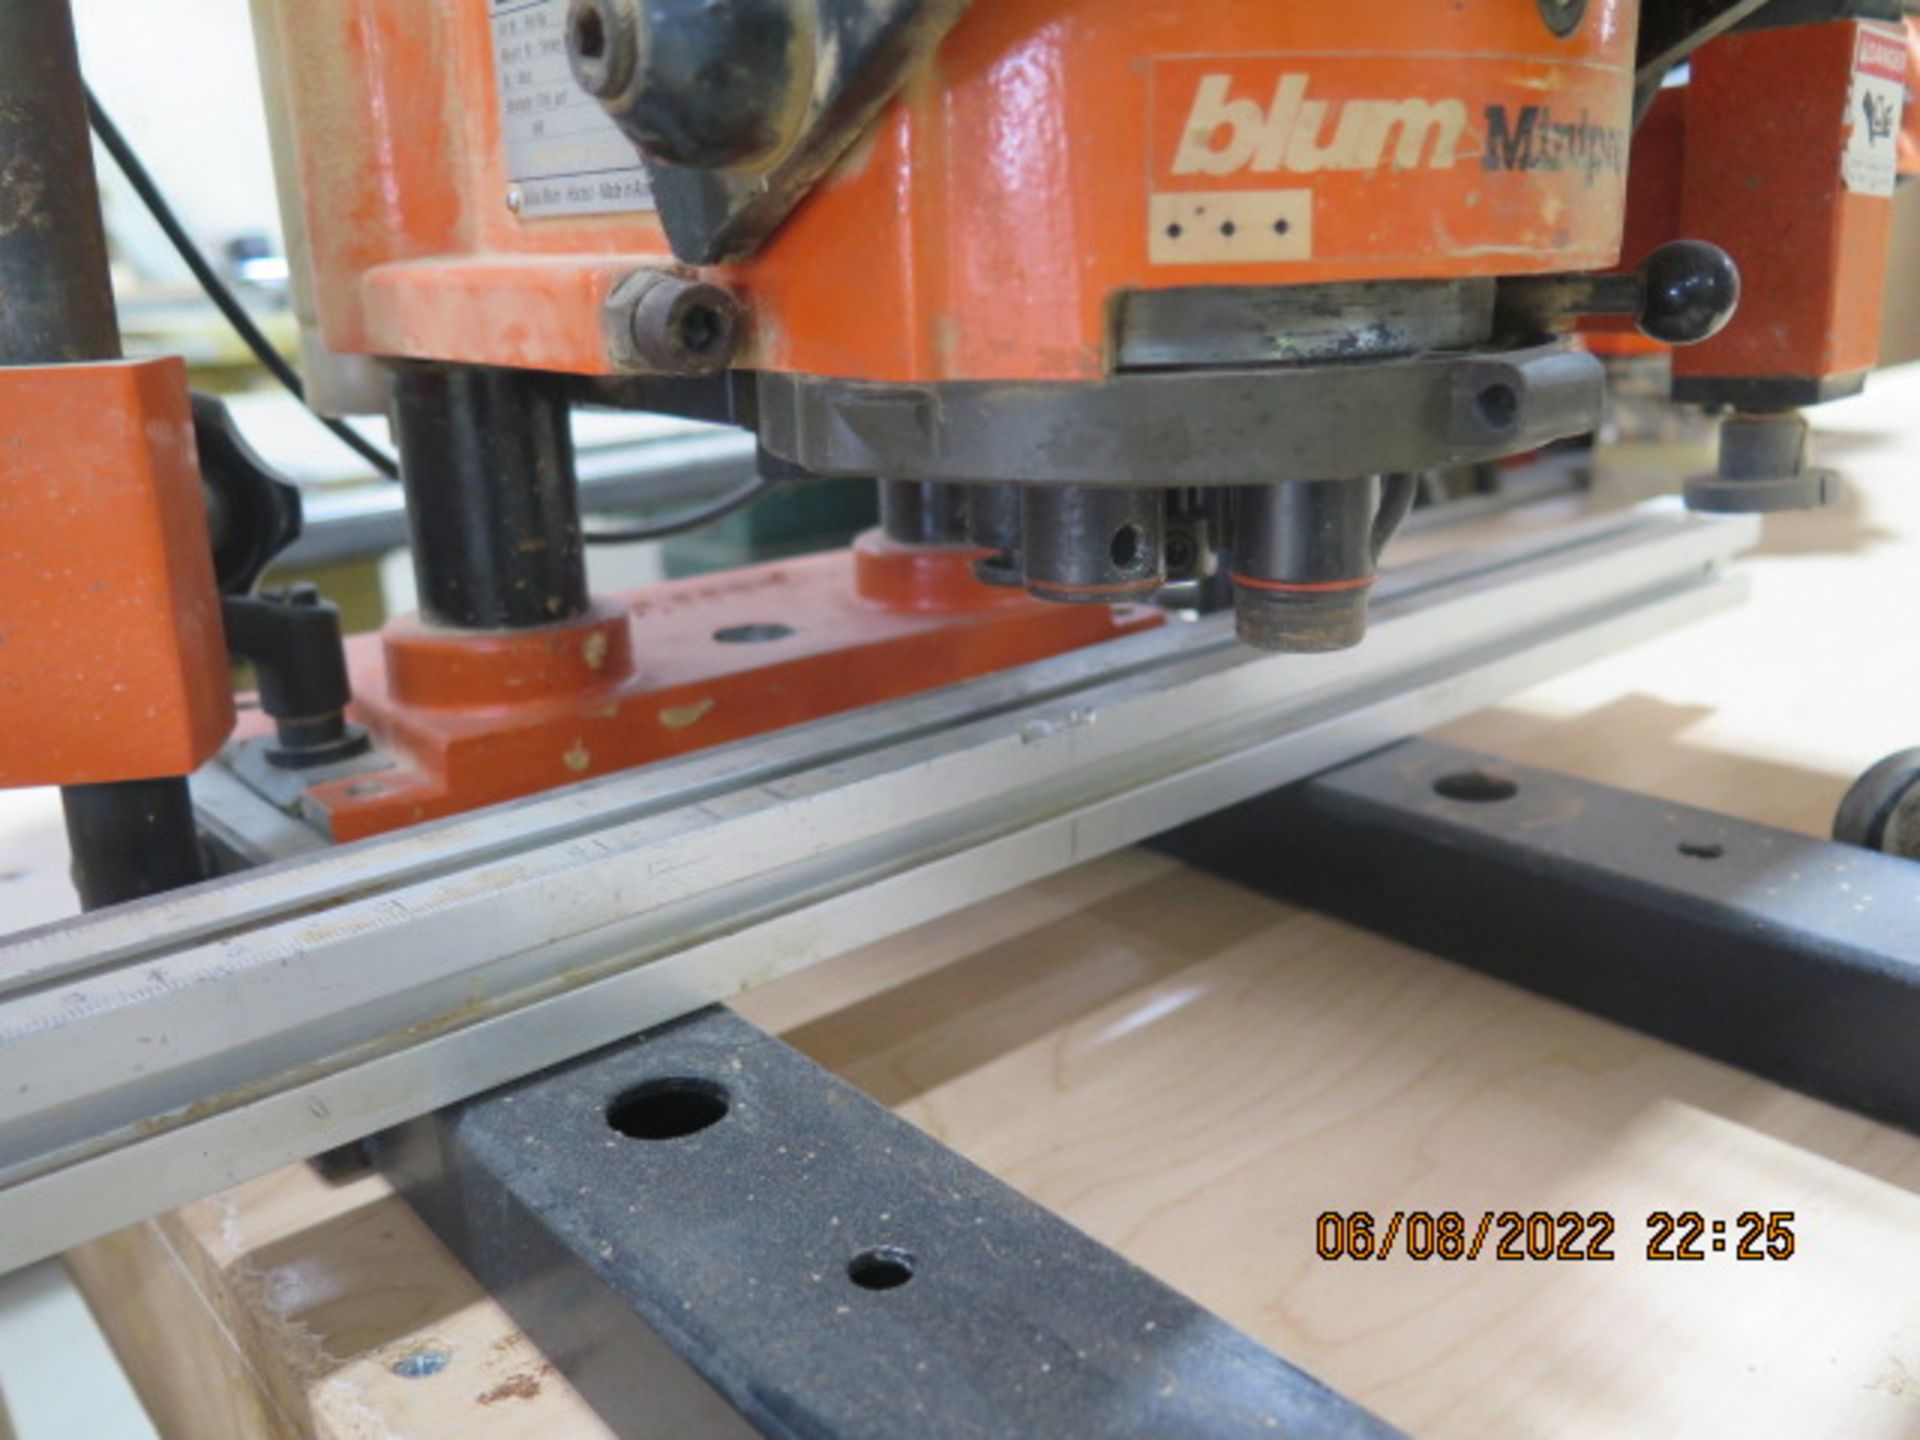 Blum mdl. M51N1004 “Mini Press” Hinge Router (SOLD AS-IS - NO WARRANTY) - Image 3 of 7